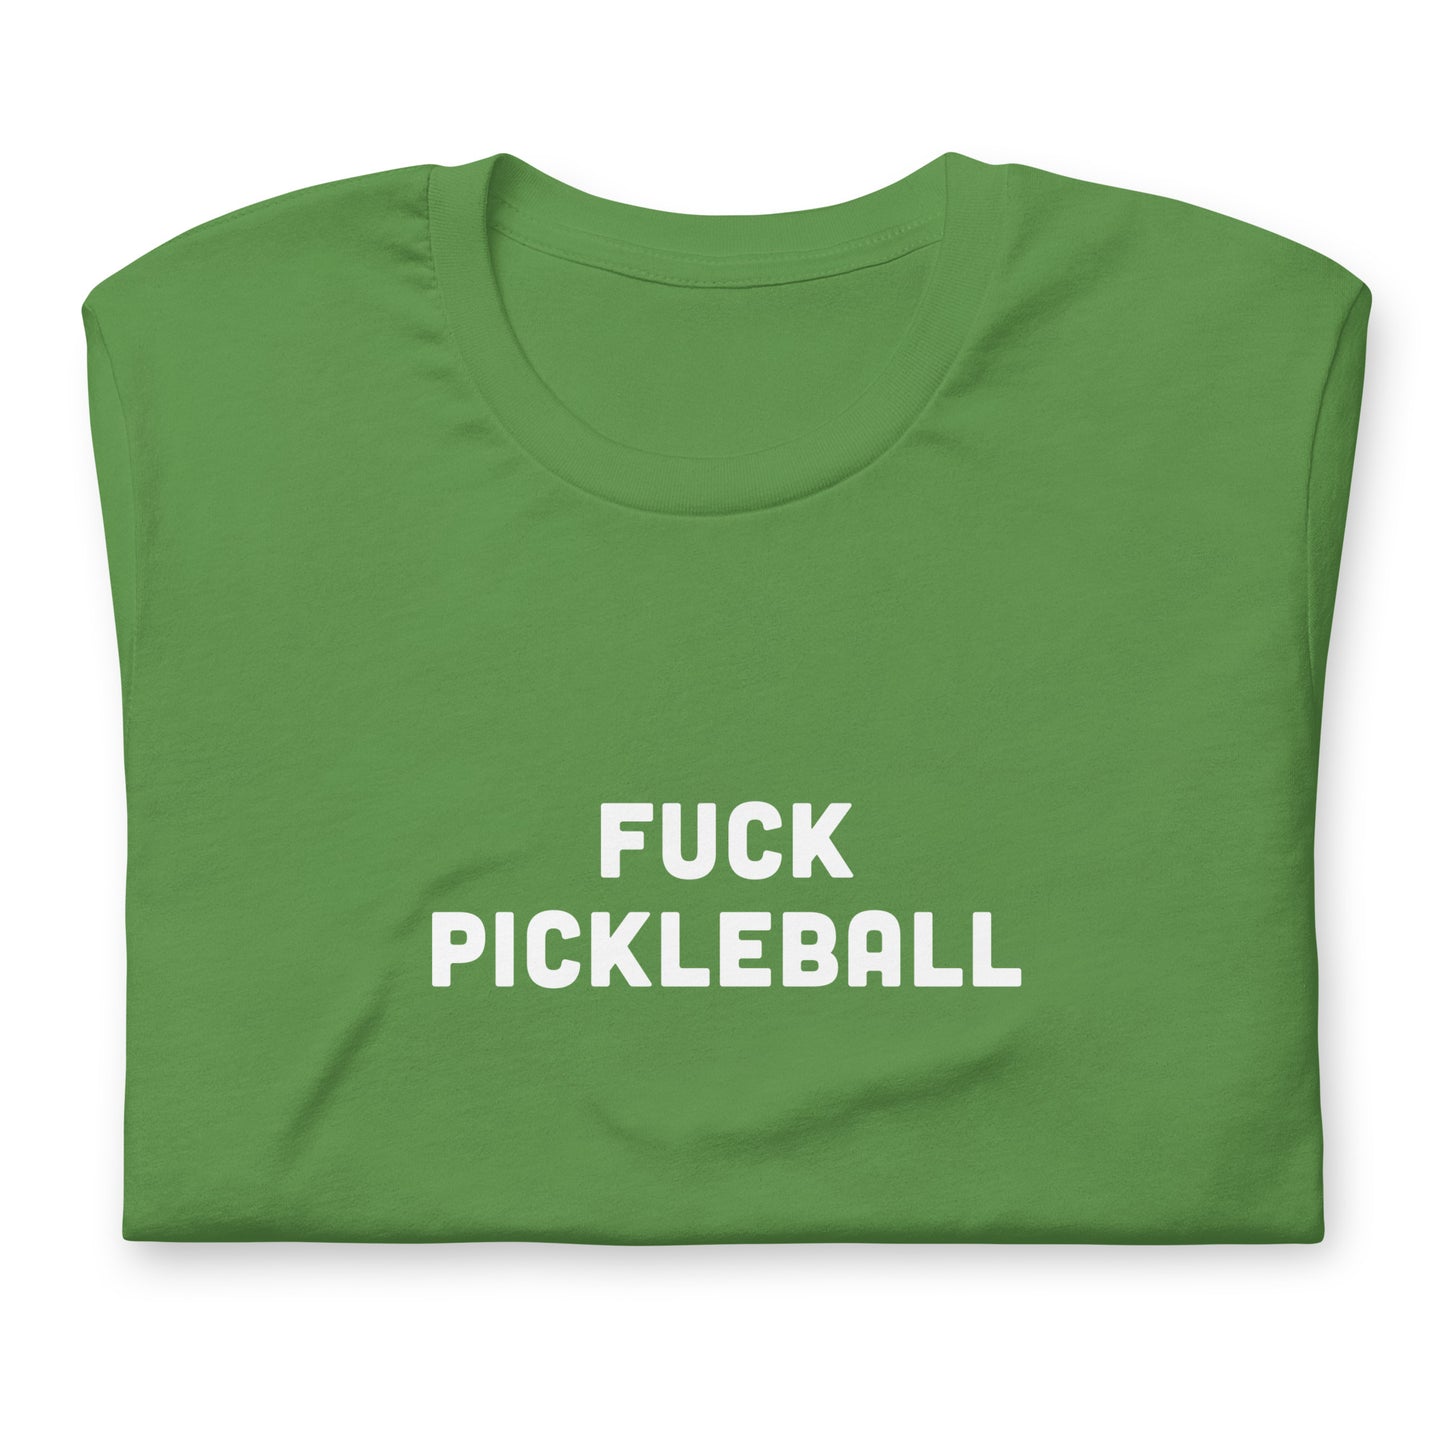 Fuck Pickleball T-Shirt Size 2XL Color Navy